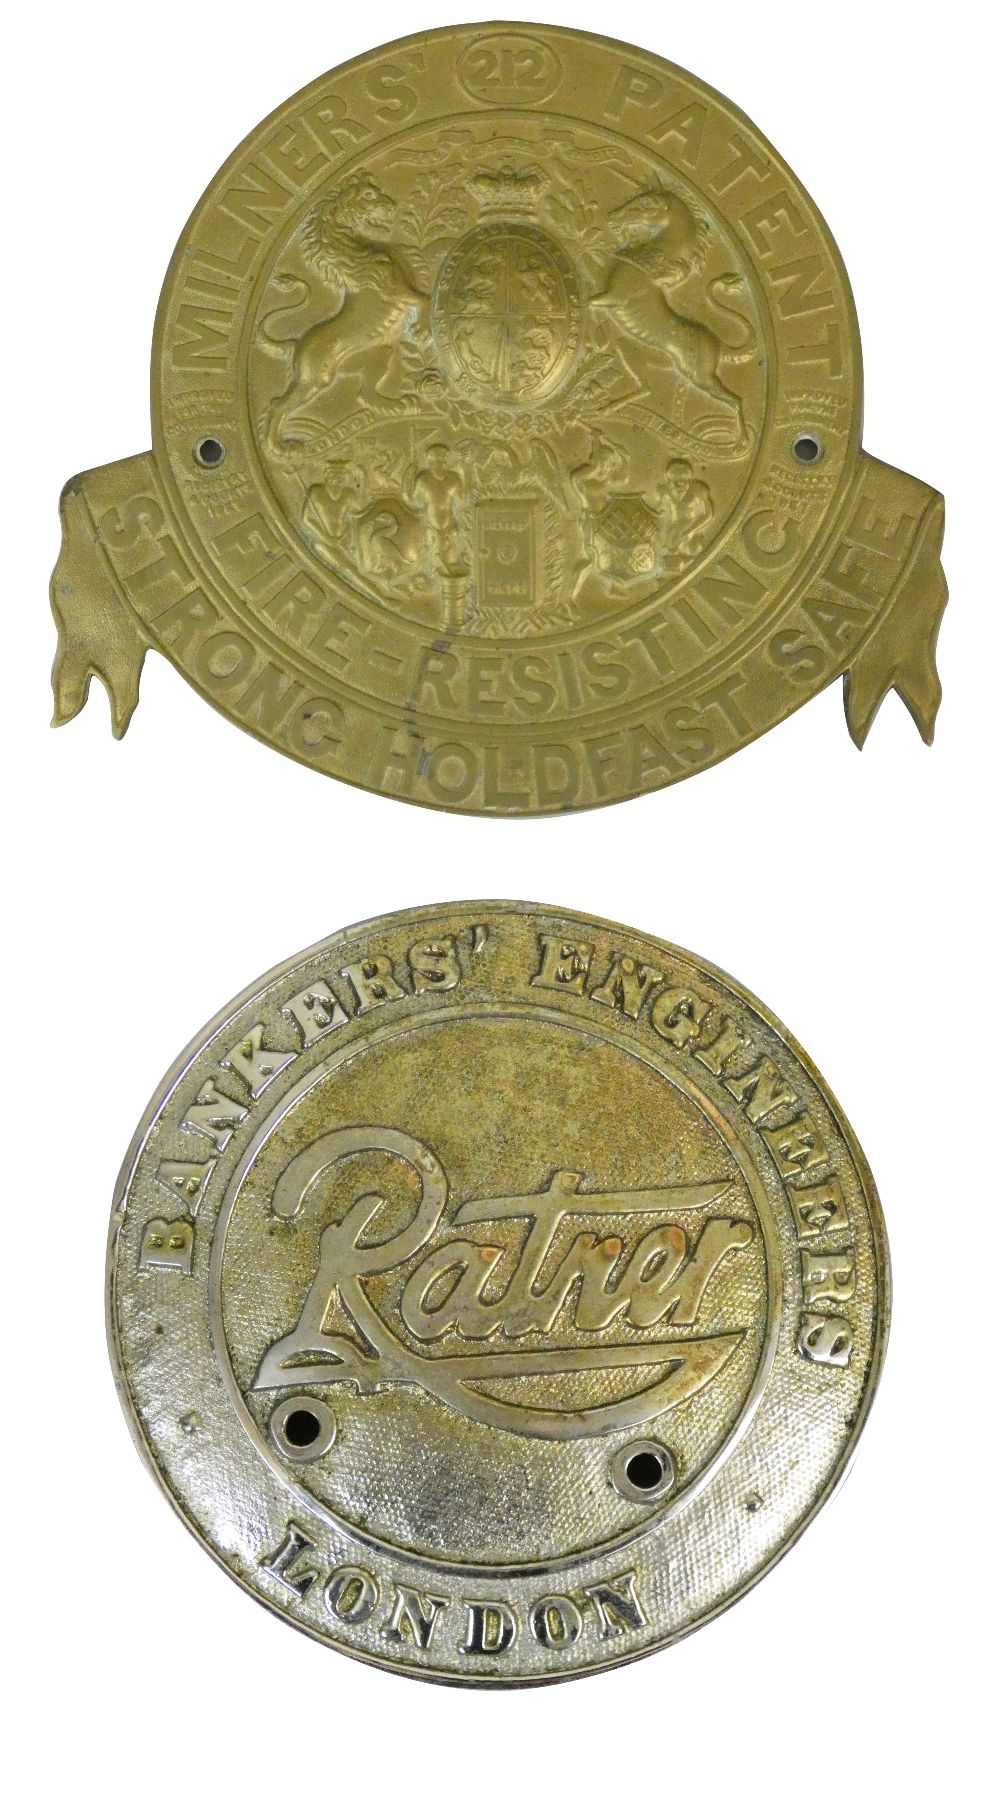 A brass safe plate 'Milners' Patent No. 212...', 25 x 23cm, together with a Ratner safe plate,